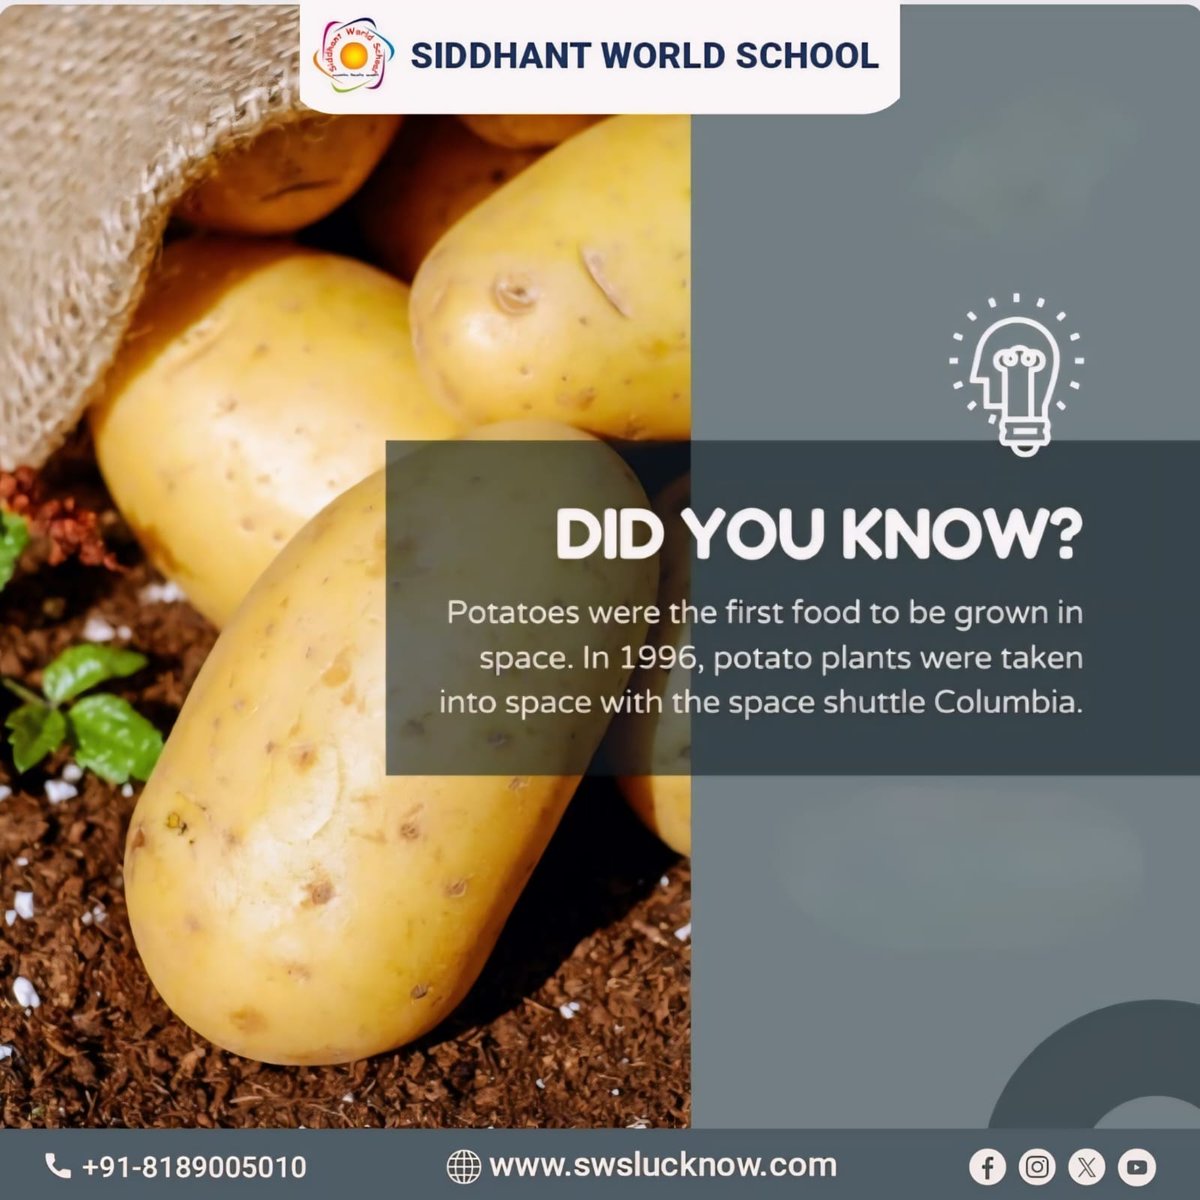 In 1996, potatoes became the first food grown in space, embarked on a groundbreaking journey aboard the space shuttle Columbia, paving the way for agricultural innovation beyond Earth.

Visit us: swslucknow.com 

#didyouknow #facts #bestschoolnearme #CBSE #CBSESchool